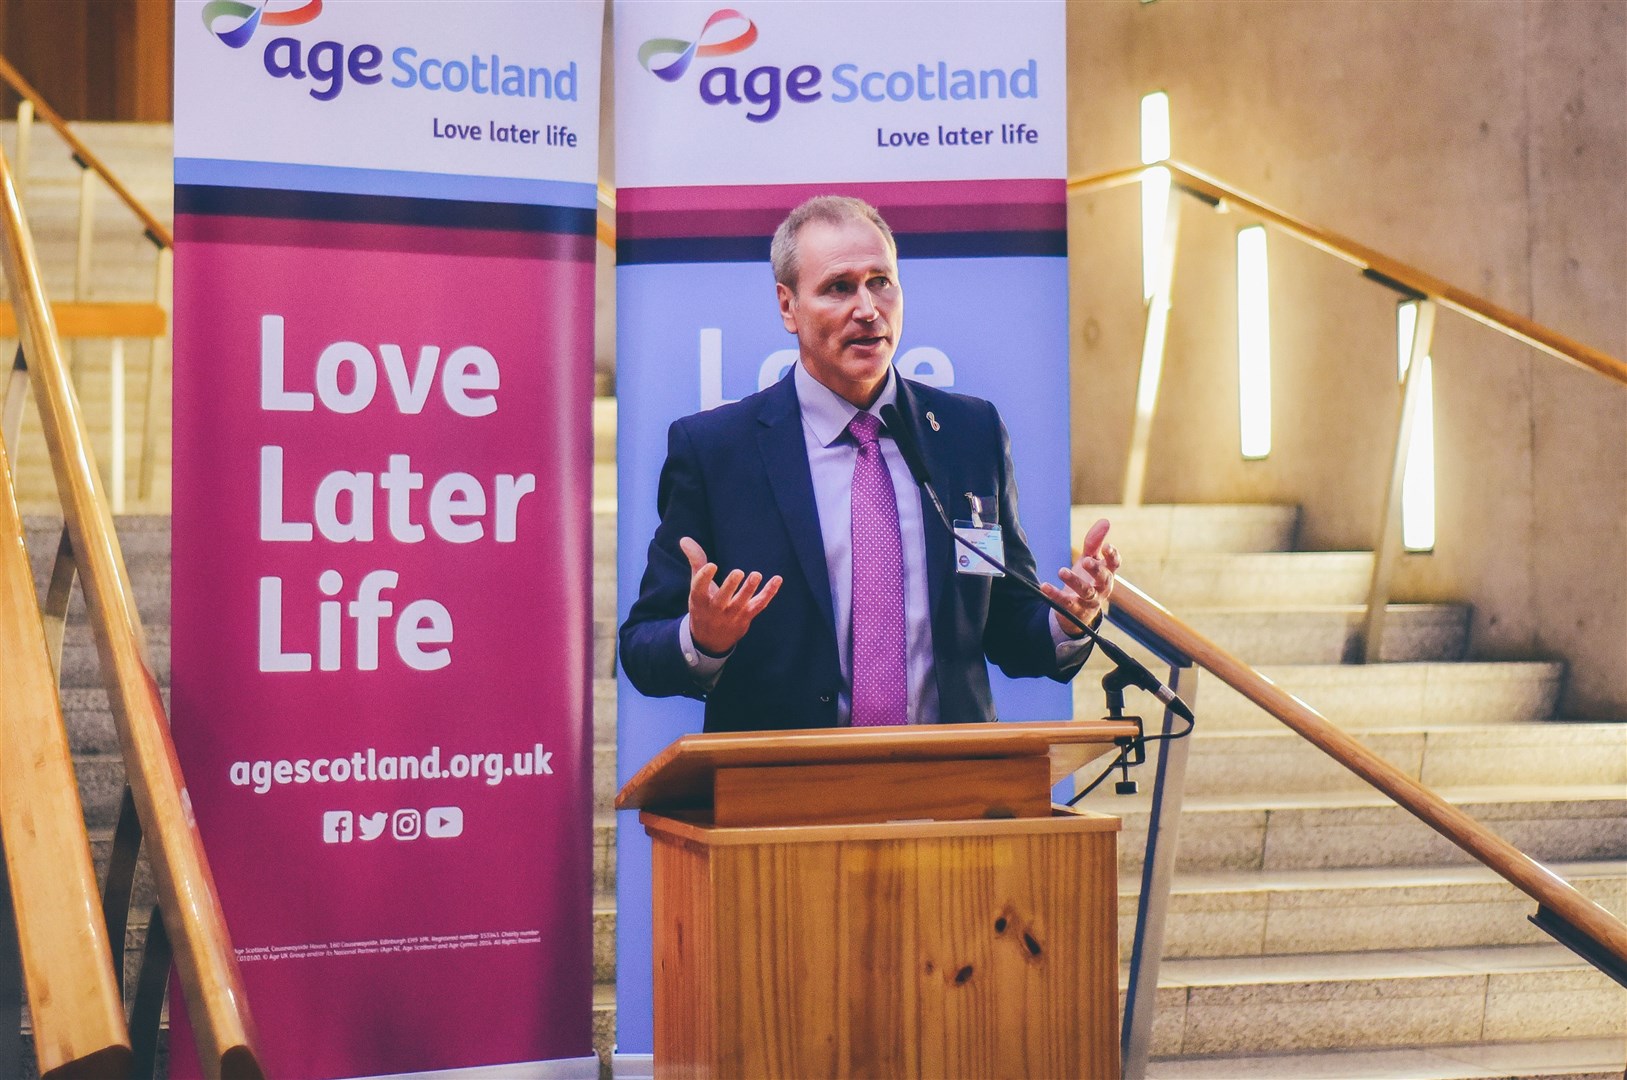 Brian Sloan: 'We need to see a significant increase in the availability of accessible and adaptable housing across Scotland and in every community.'